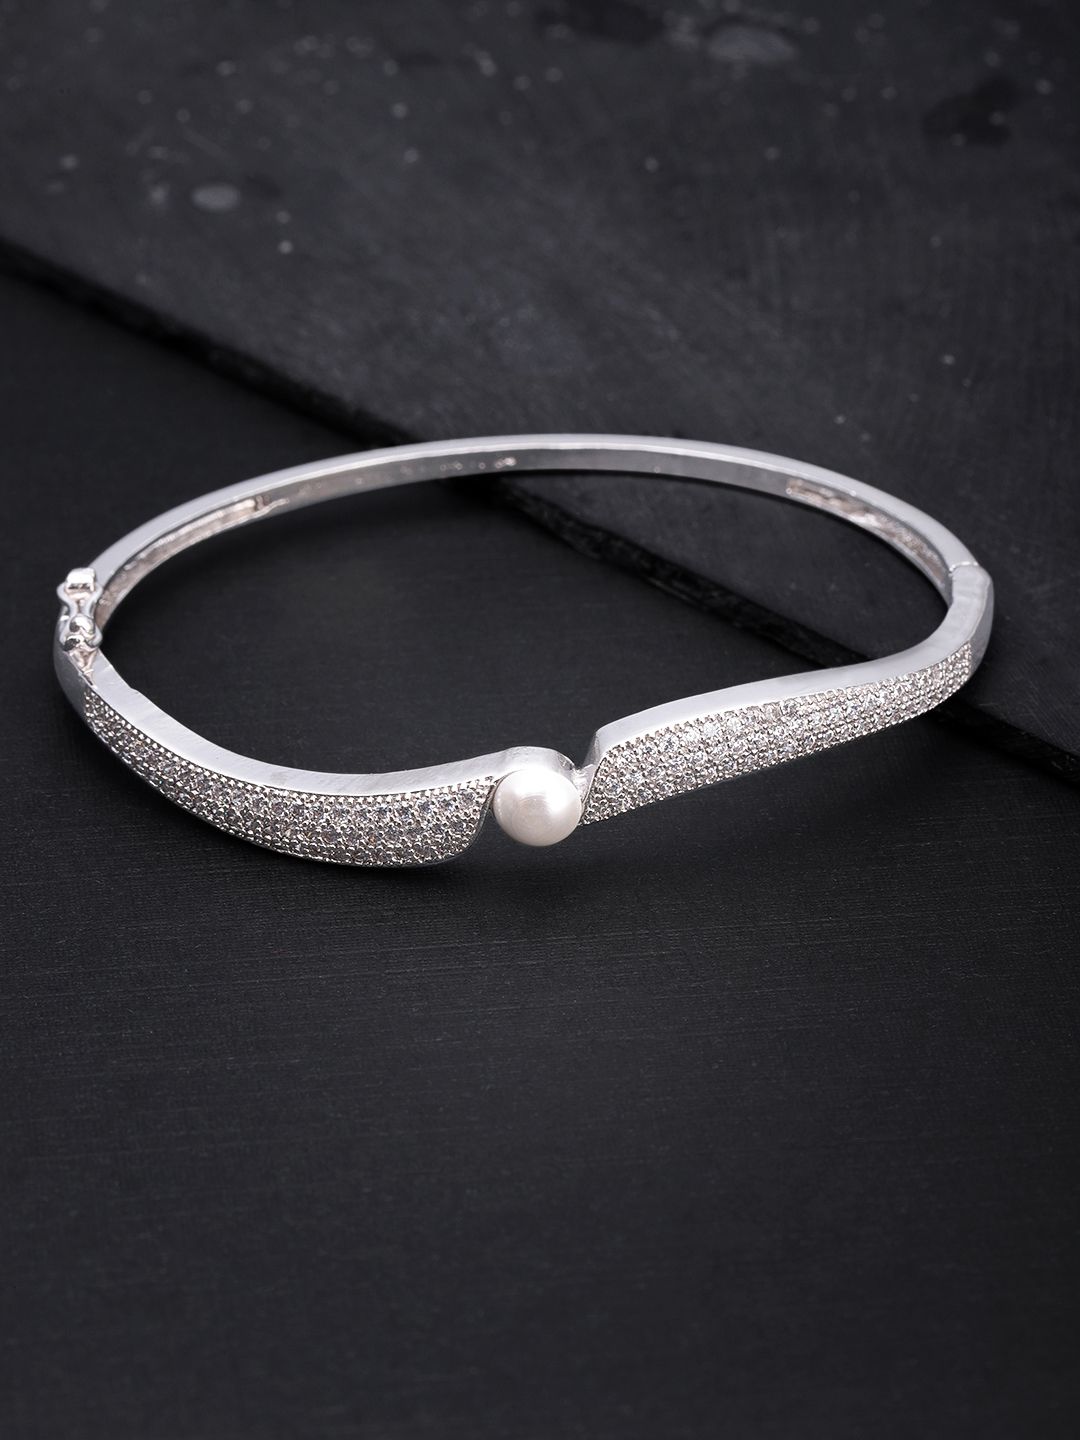 Priyaasi White Silver-Plated AD-Studded Handcrafted Bangle Style Bracelet Price in India